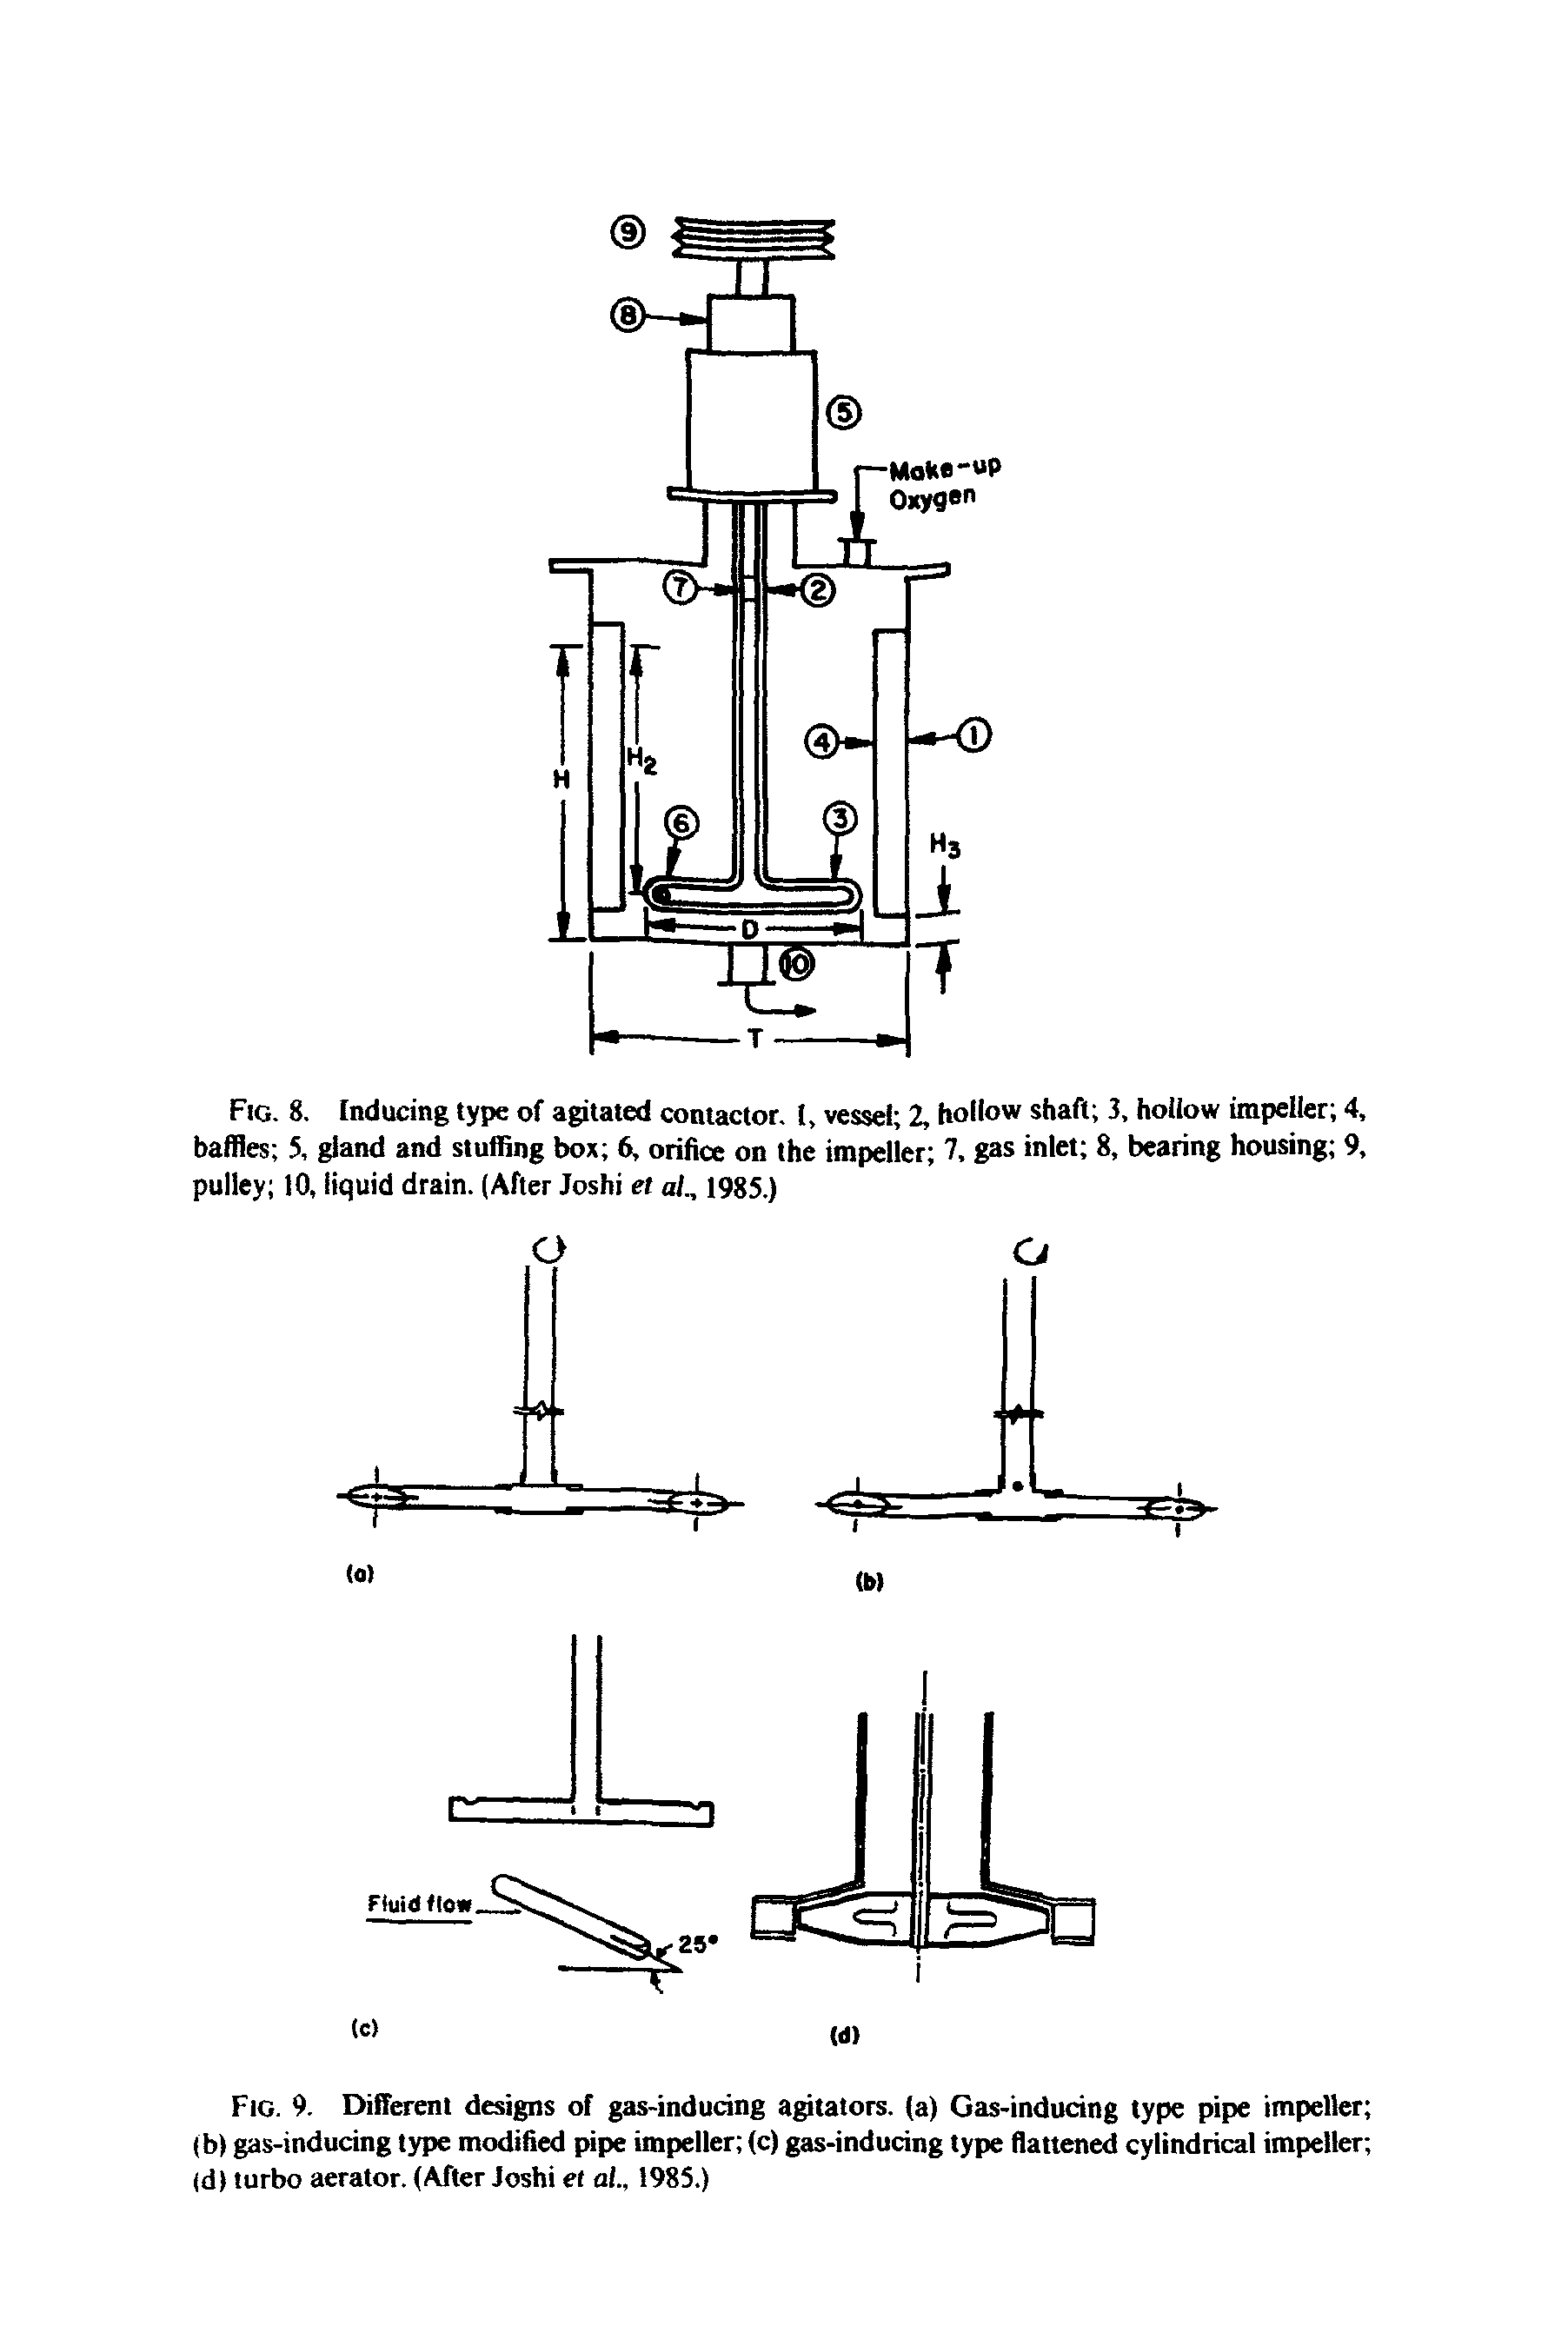 Fig. 8. Inducing type of agitated contactor. I, vessel 2, hollow shaft 3, hollow impeller 4, baffles 5, gland and stuffing box 6, orifice on the impeller 7, gas inlet 8, bearing housing 9, pulley 10, liquid drain. (After Joshi et at., 1985.)...